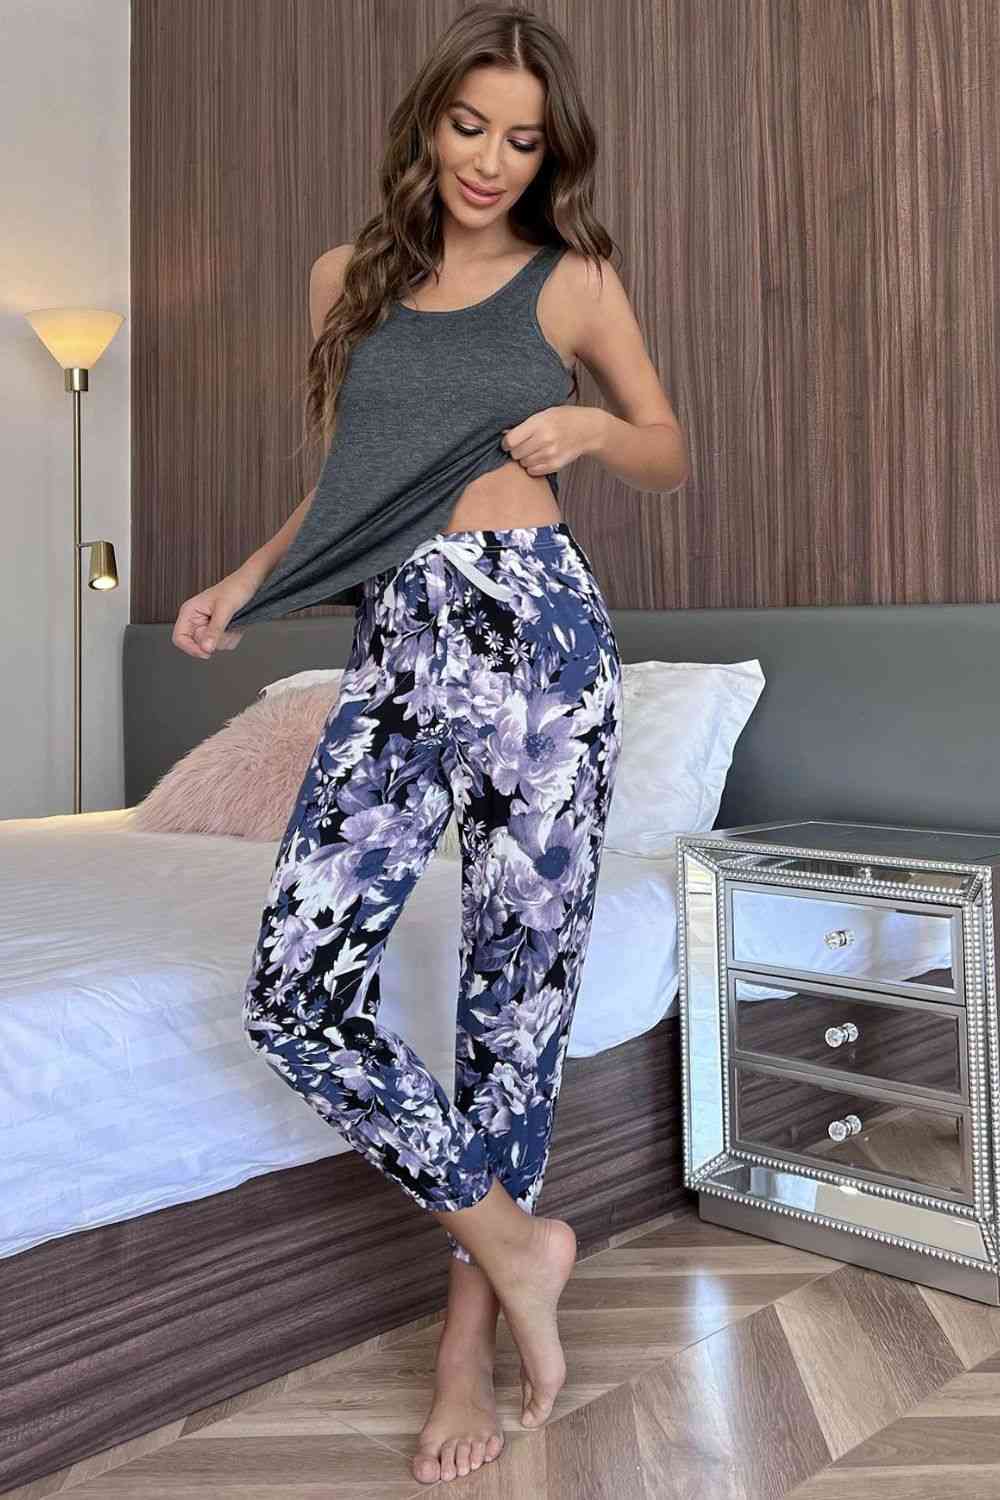 Scoop Neck Tank and Floral Cropped Pants Lounge Set Loungewear Krazy Heart Designs Boutique Grey S 